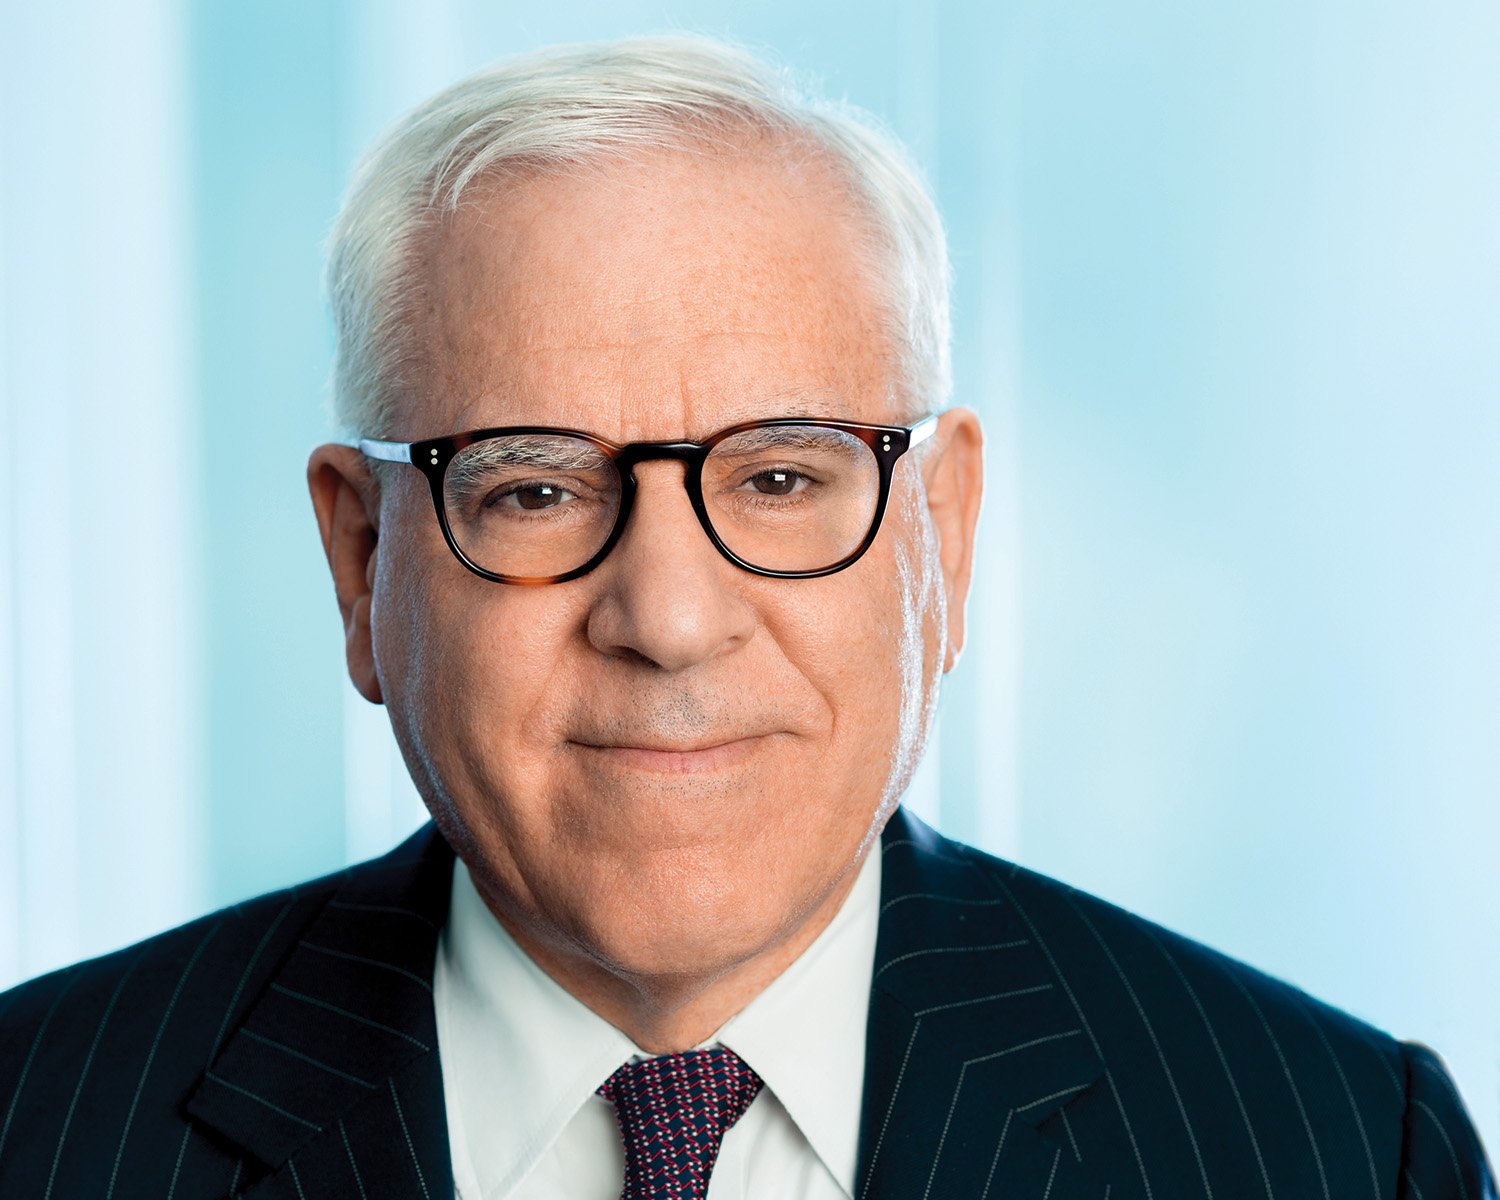 A headshot of David M. Rubenstein. He faces the camera and smiles. He has pale skin and short white hair. He wears plastic glasses, a blue and red tie, a white collared shirt, and a blue pinstriped suit. Photo courtesy of David M. Rubenstein.